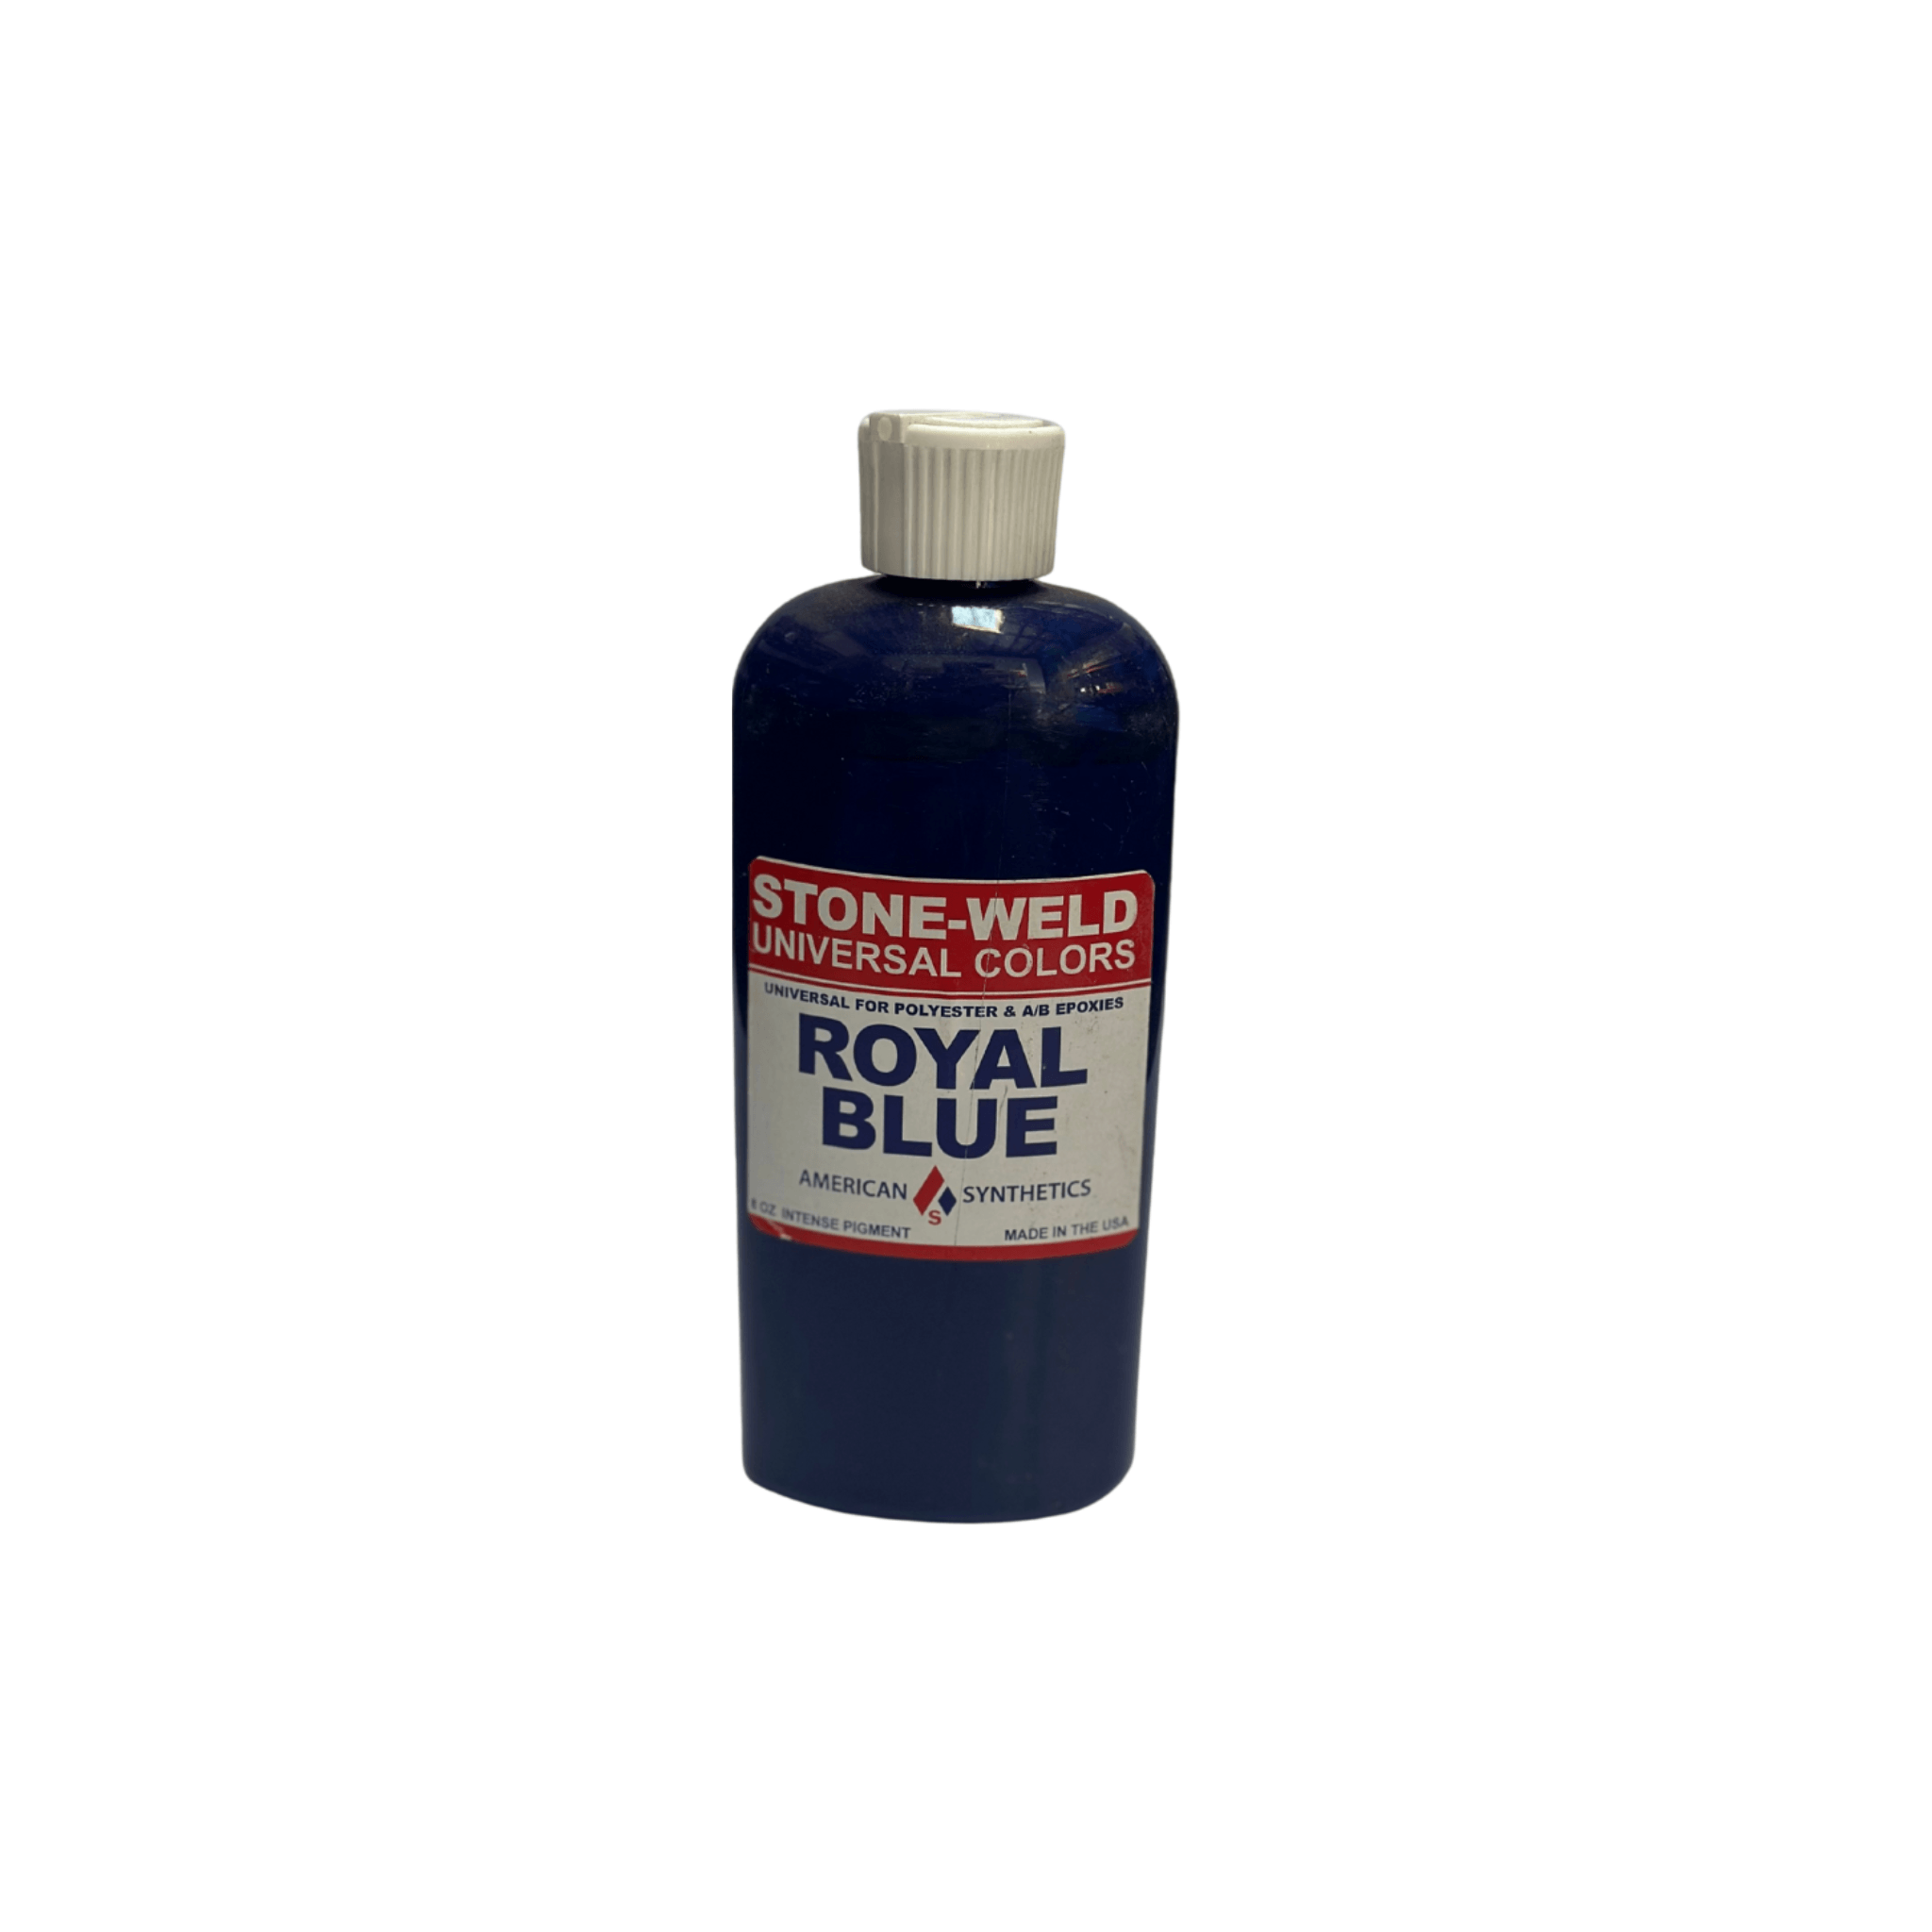 Stone-Weld 8 oz. Universal Color, Royal Blue - Direct Stone Tool Supply, Inc